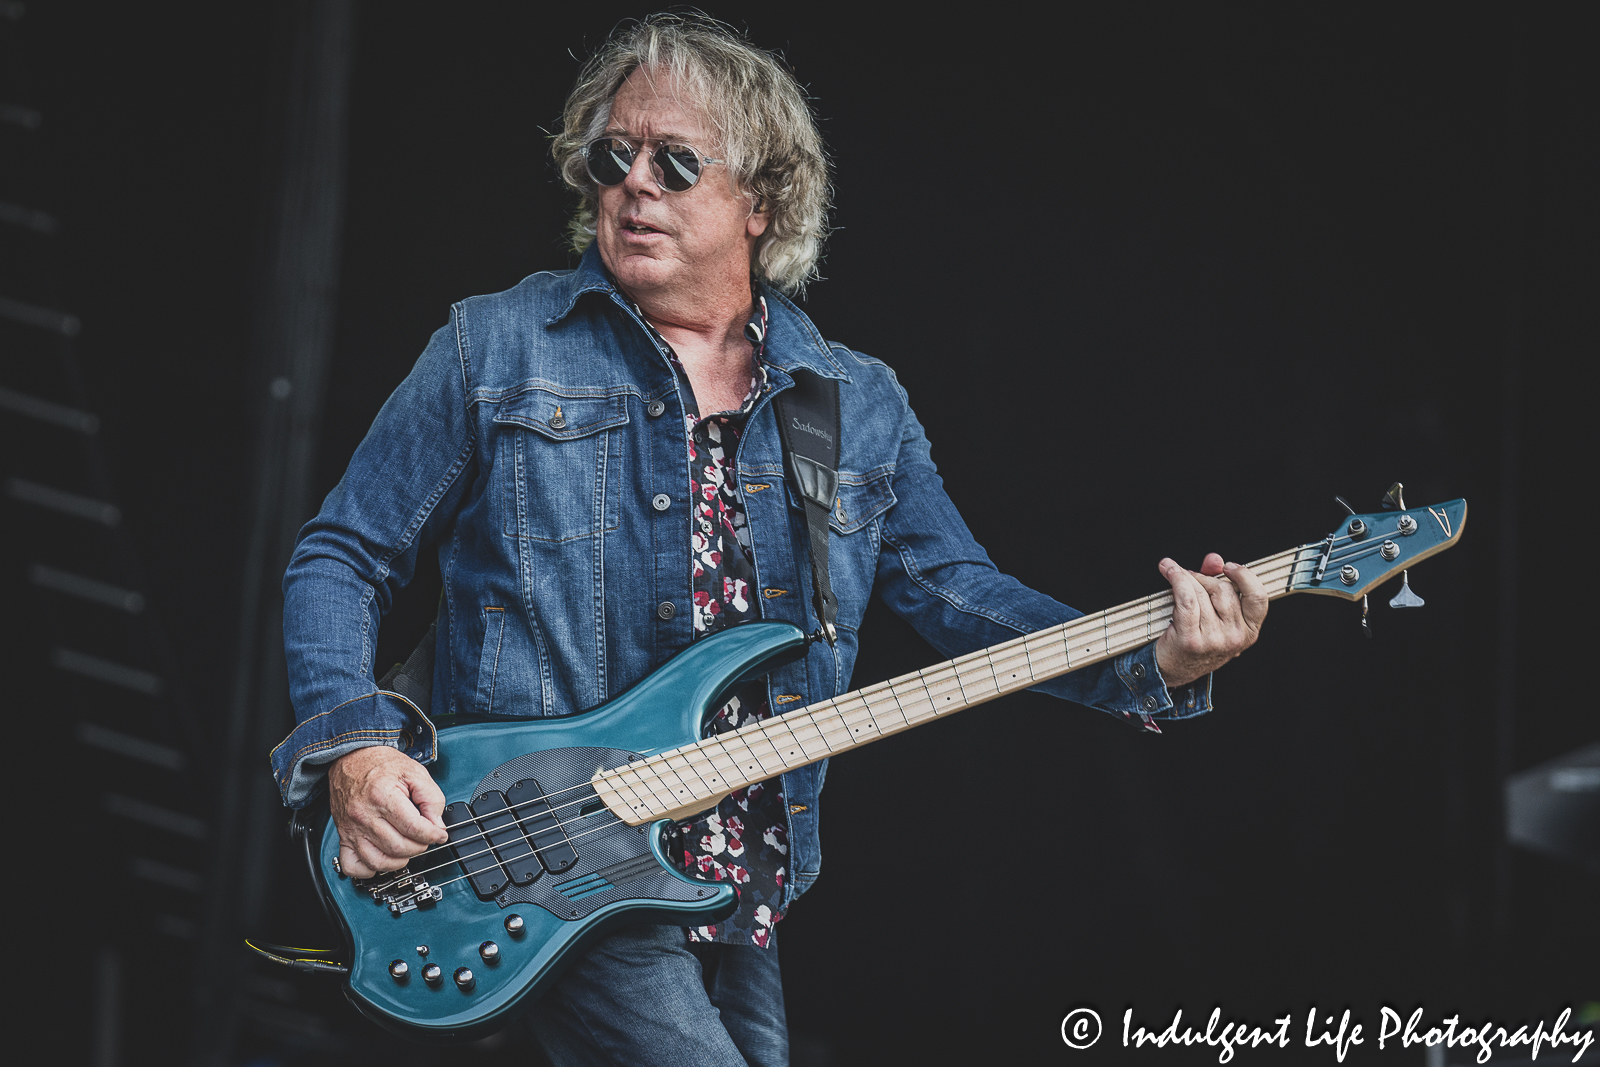 Bass guitarist Ken "Spider" Sinnaeve of Loverboy playing live at Starlight Theatre in Kansas City, MO on July 18, 2023.